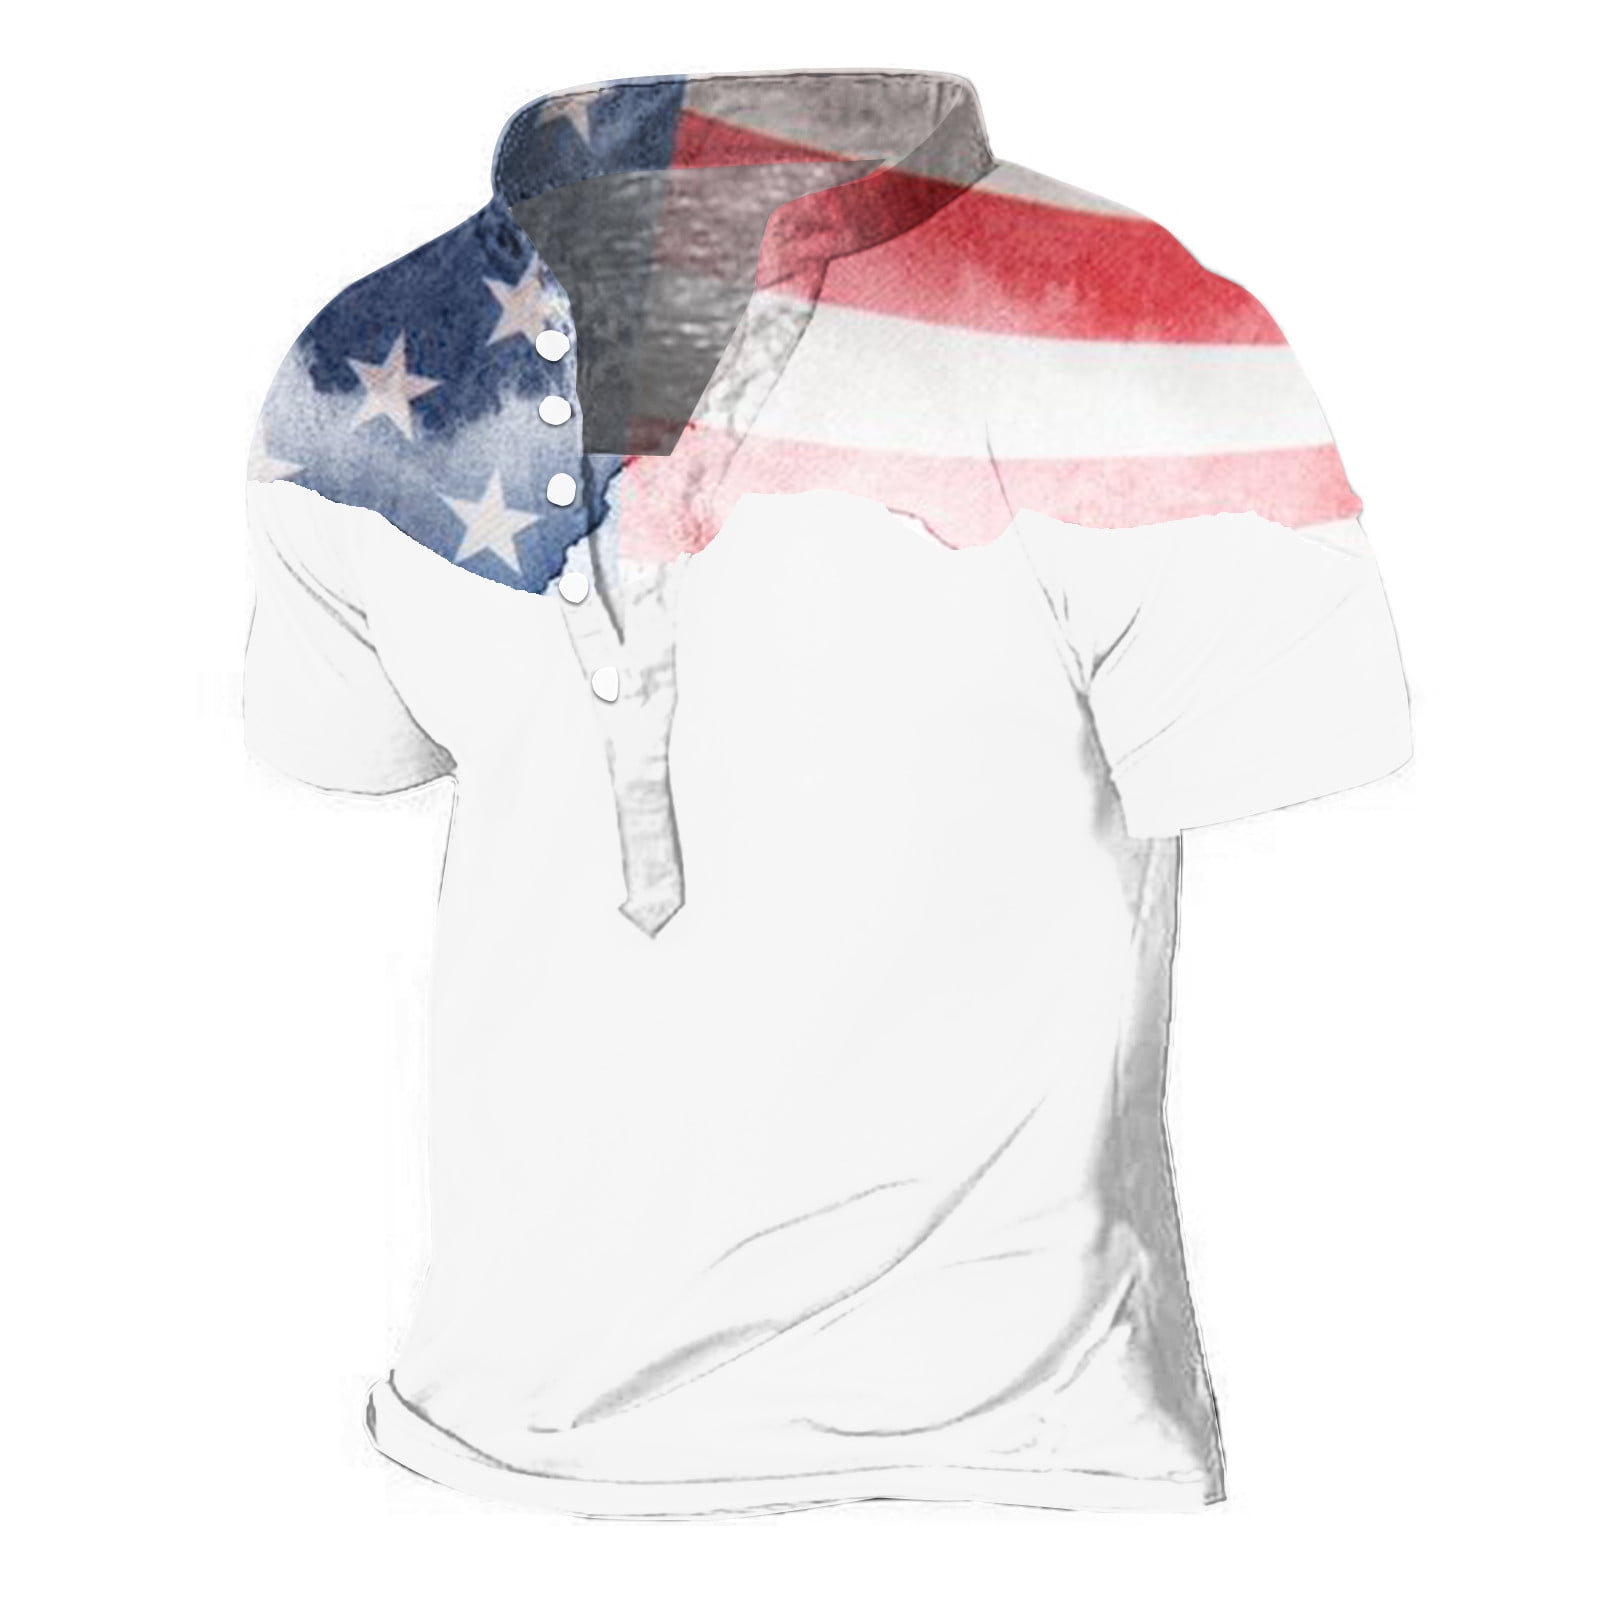 Fanxing American Flag Shirts for Men Patriotic Shirts 4th of July ...